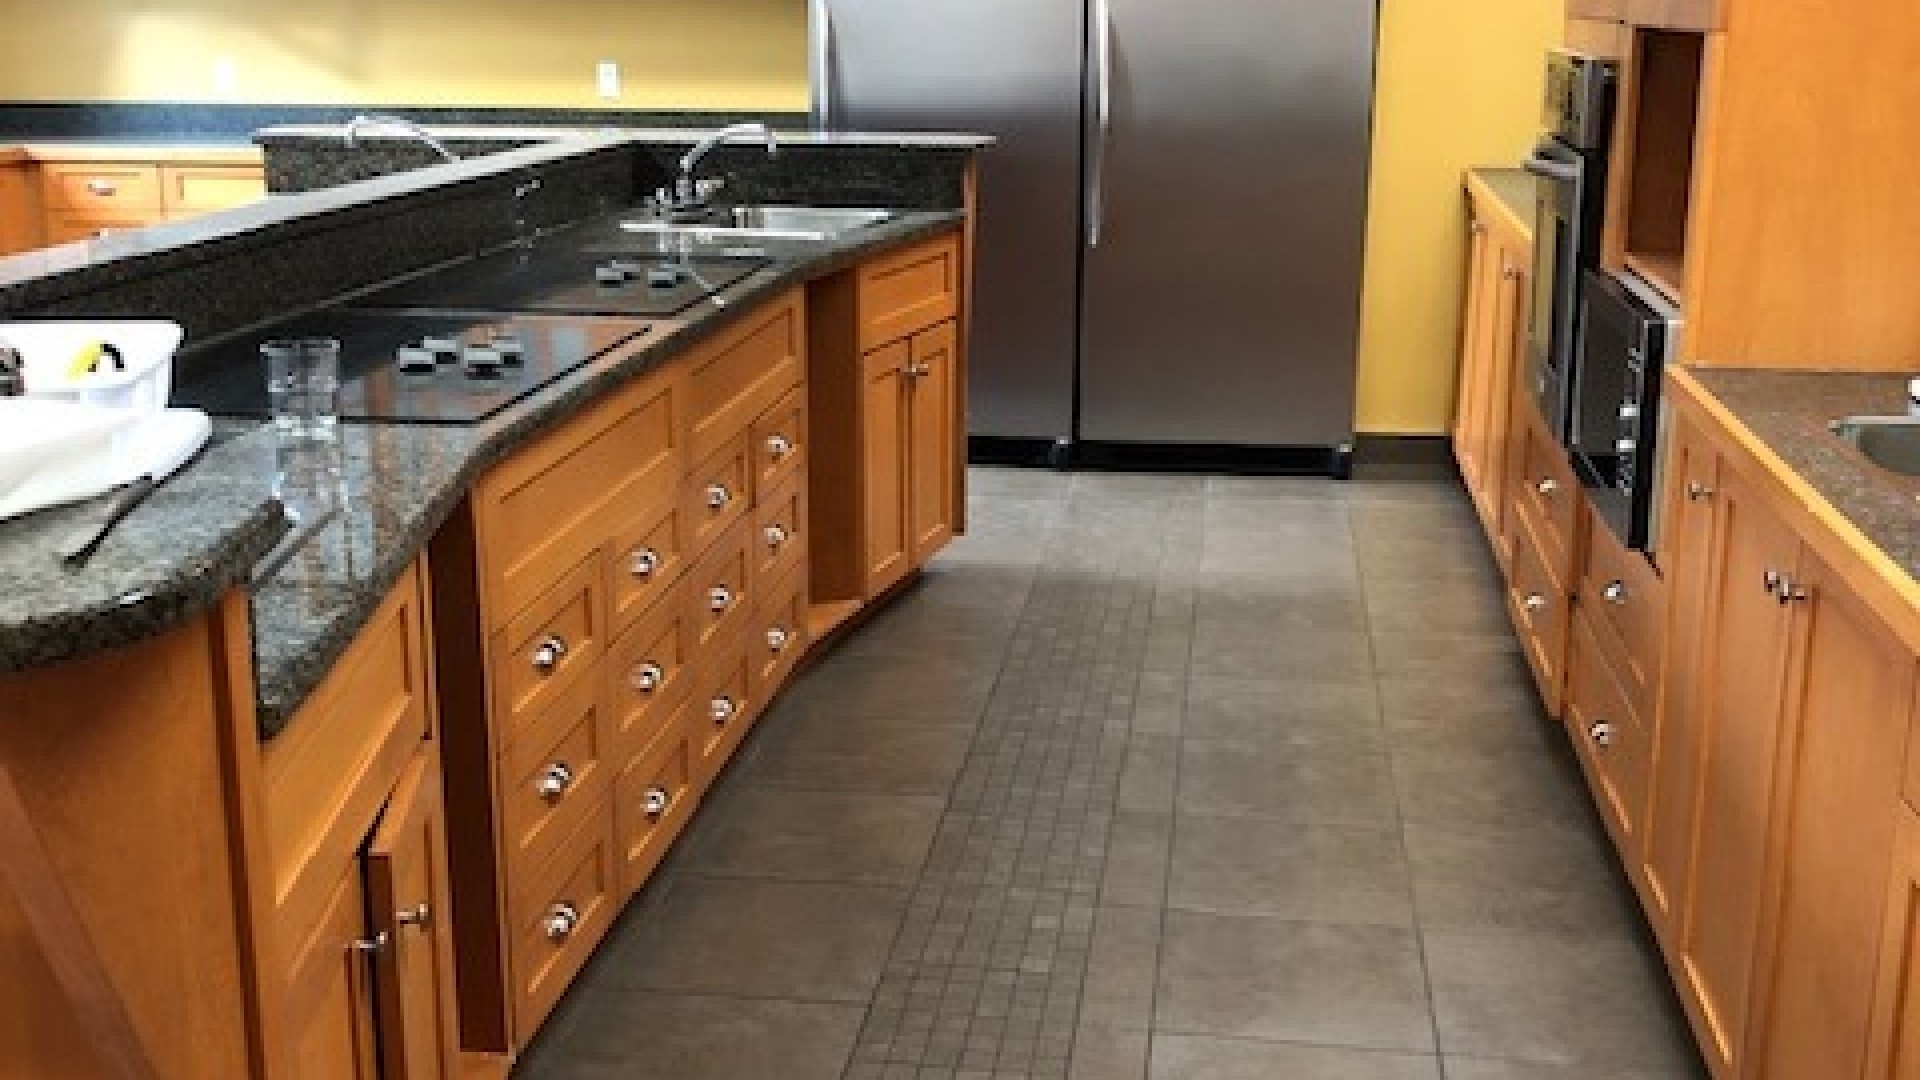 Kitchen with a large fridge and multiple counter top stoves.